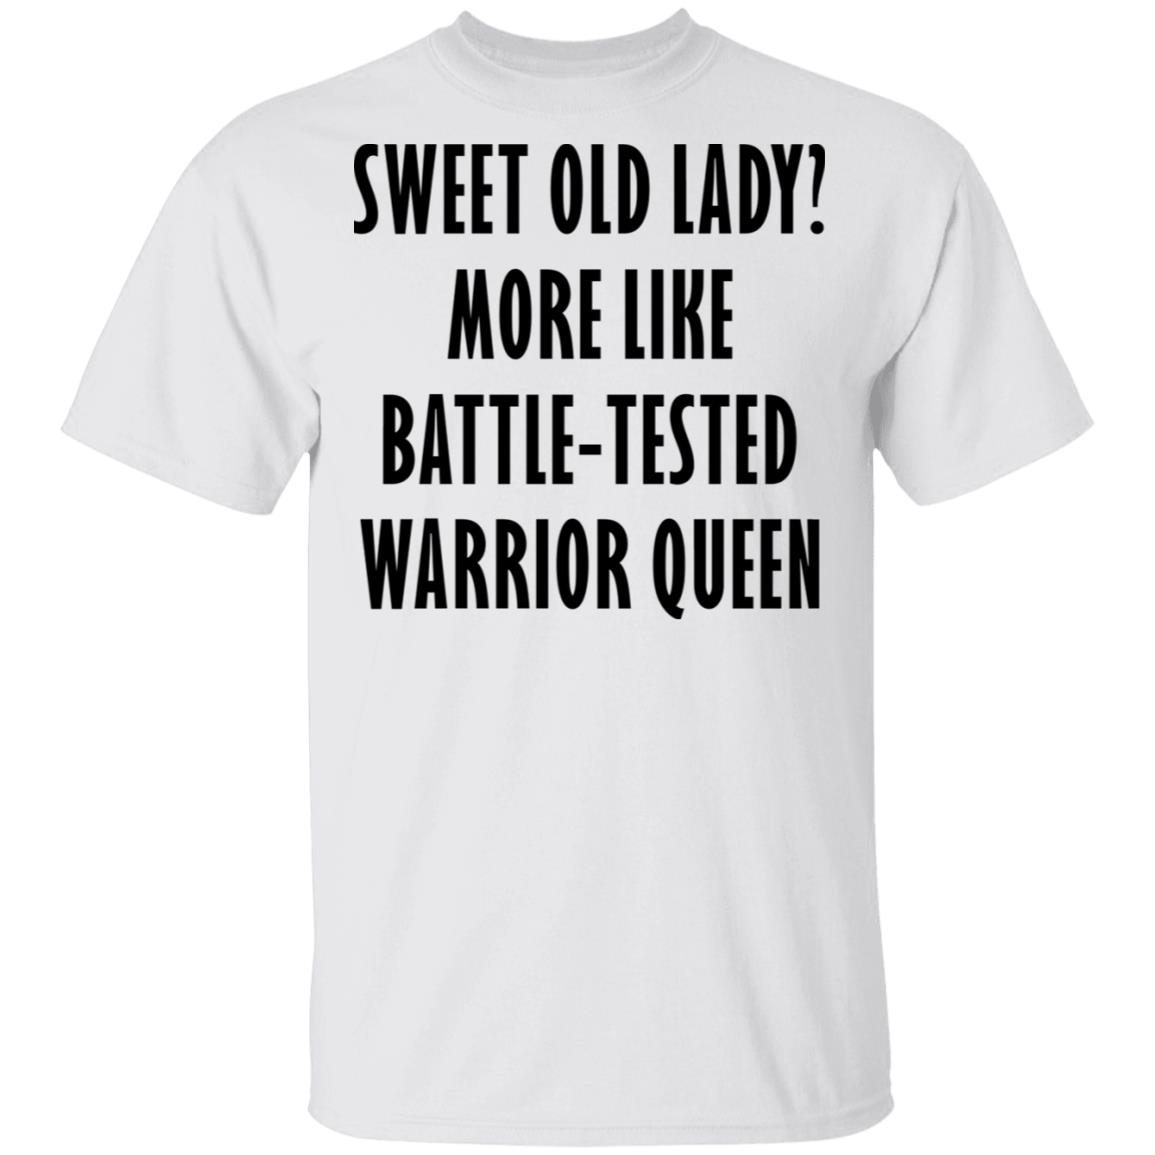 Sweet old lady more like battle tested warrior queen shirt - Rockatee